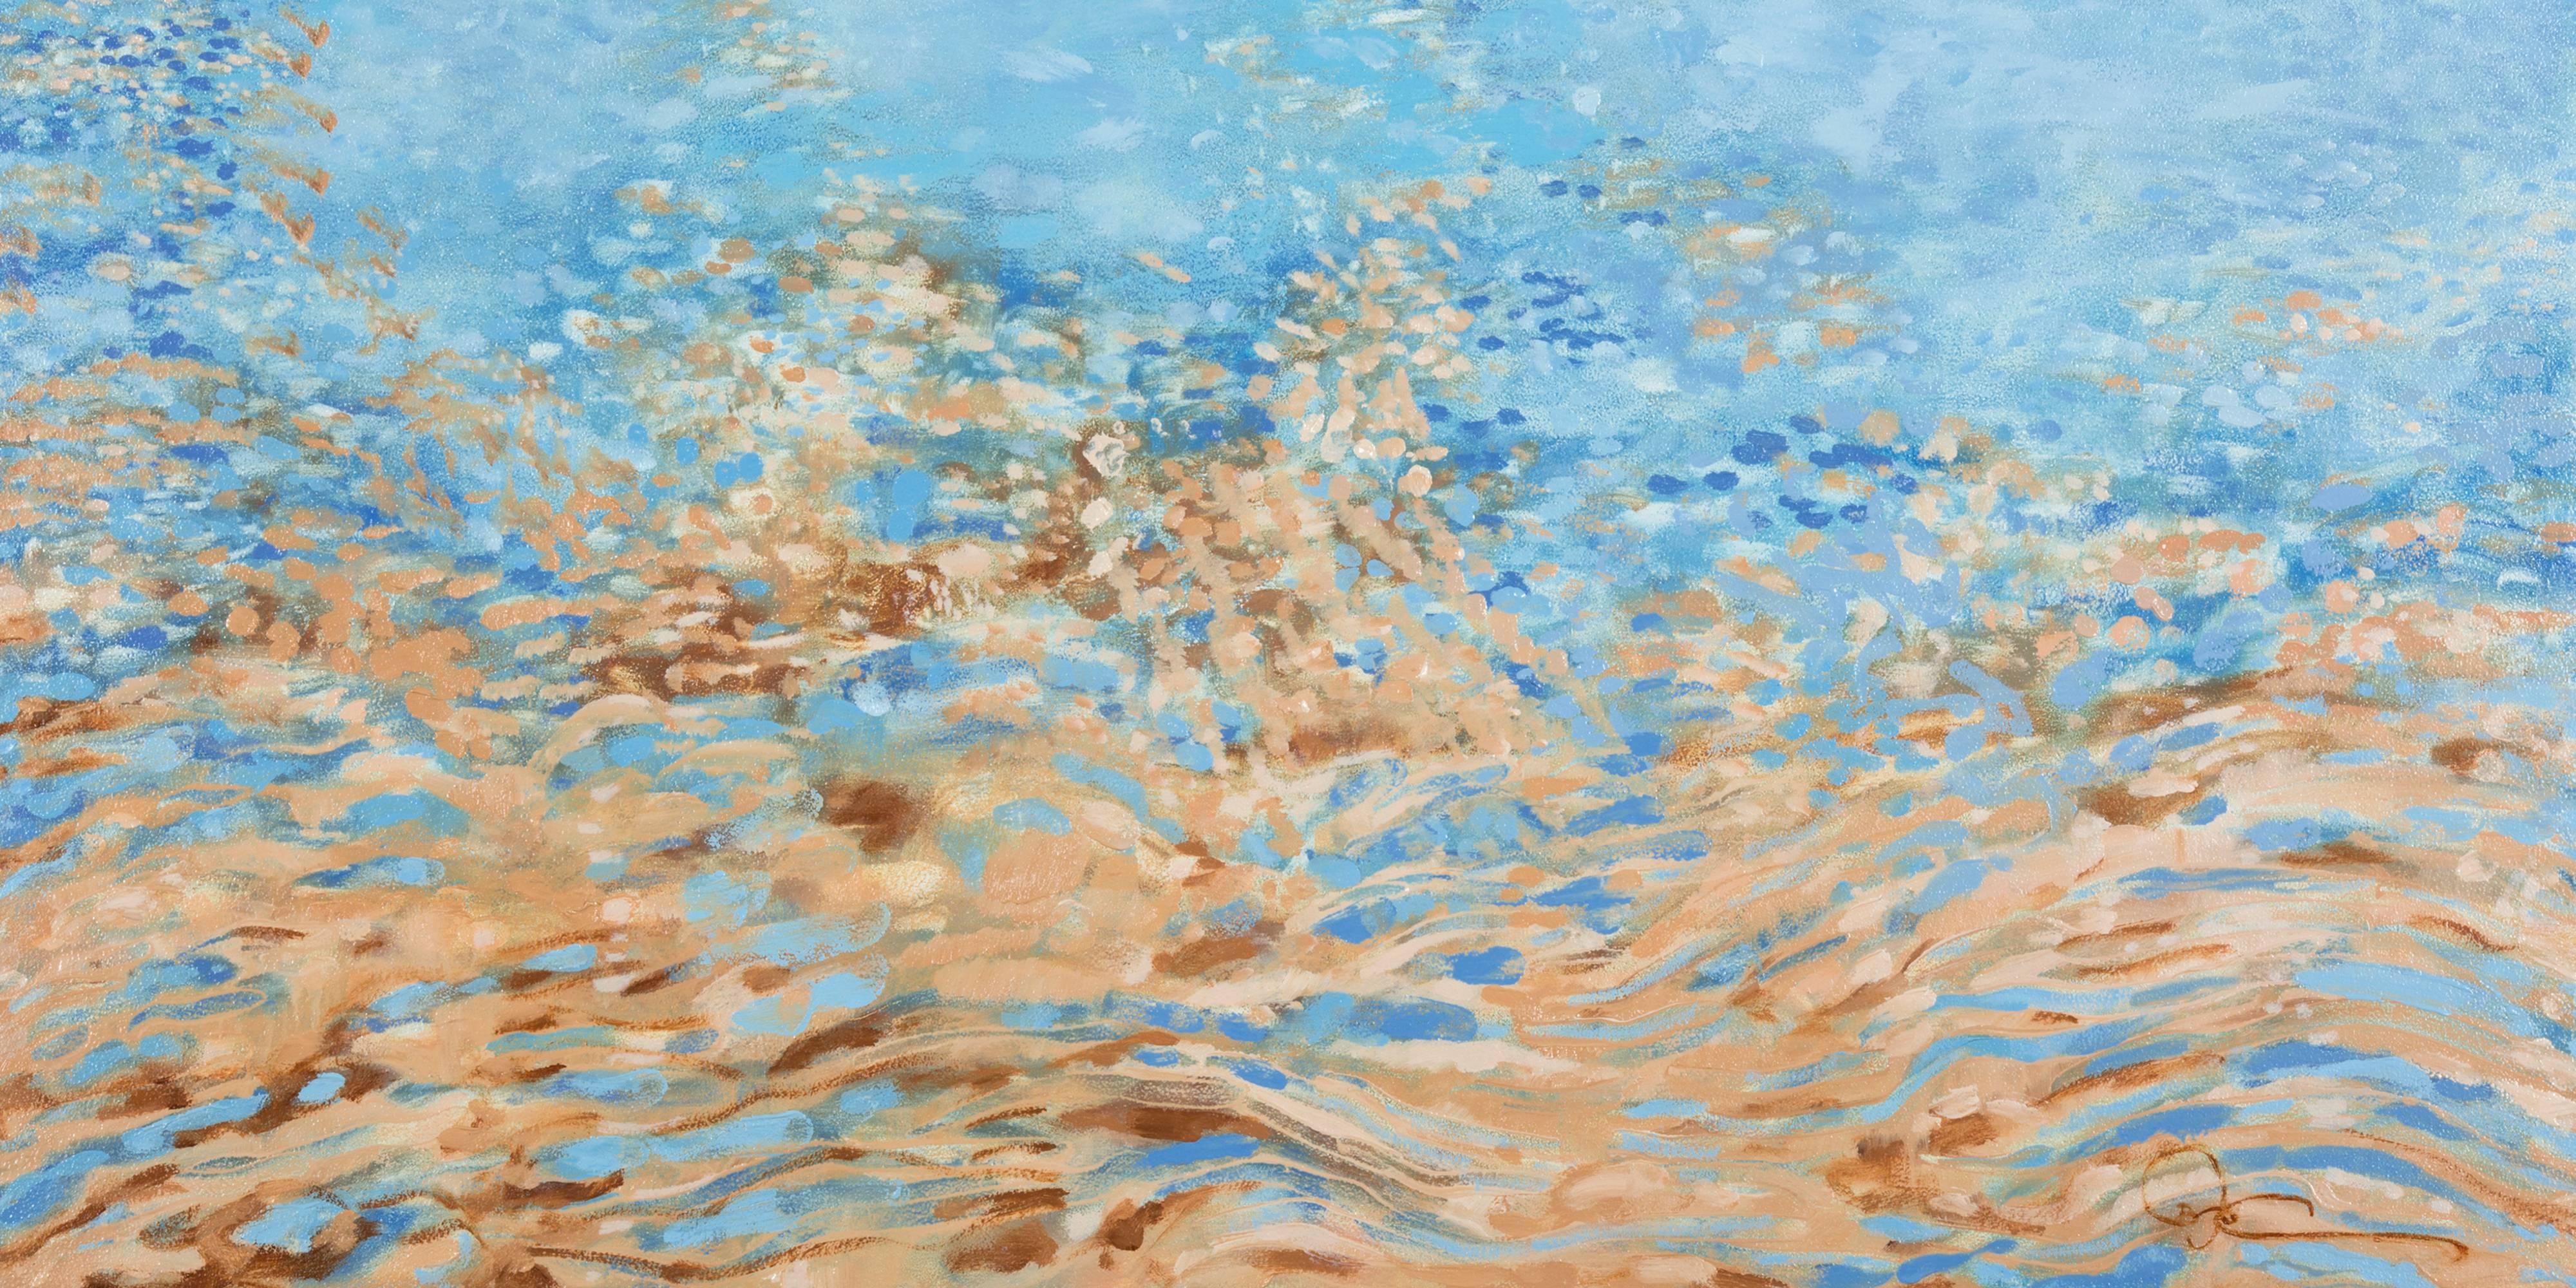 Abstract Impressionist water and sky painting with a minimal, clean feel that is awash with warm and cool tones. Betty Jo Costanzo immerses herself in coastal settings, taking in all of her senses: sight, sound, touch, taste, and smell. She records